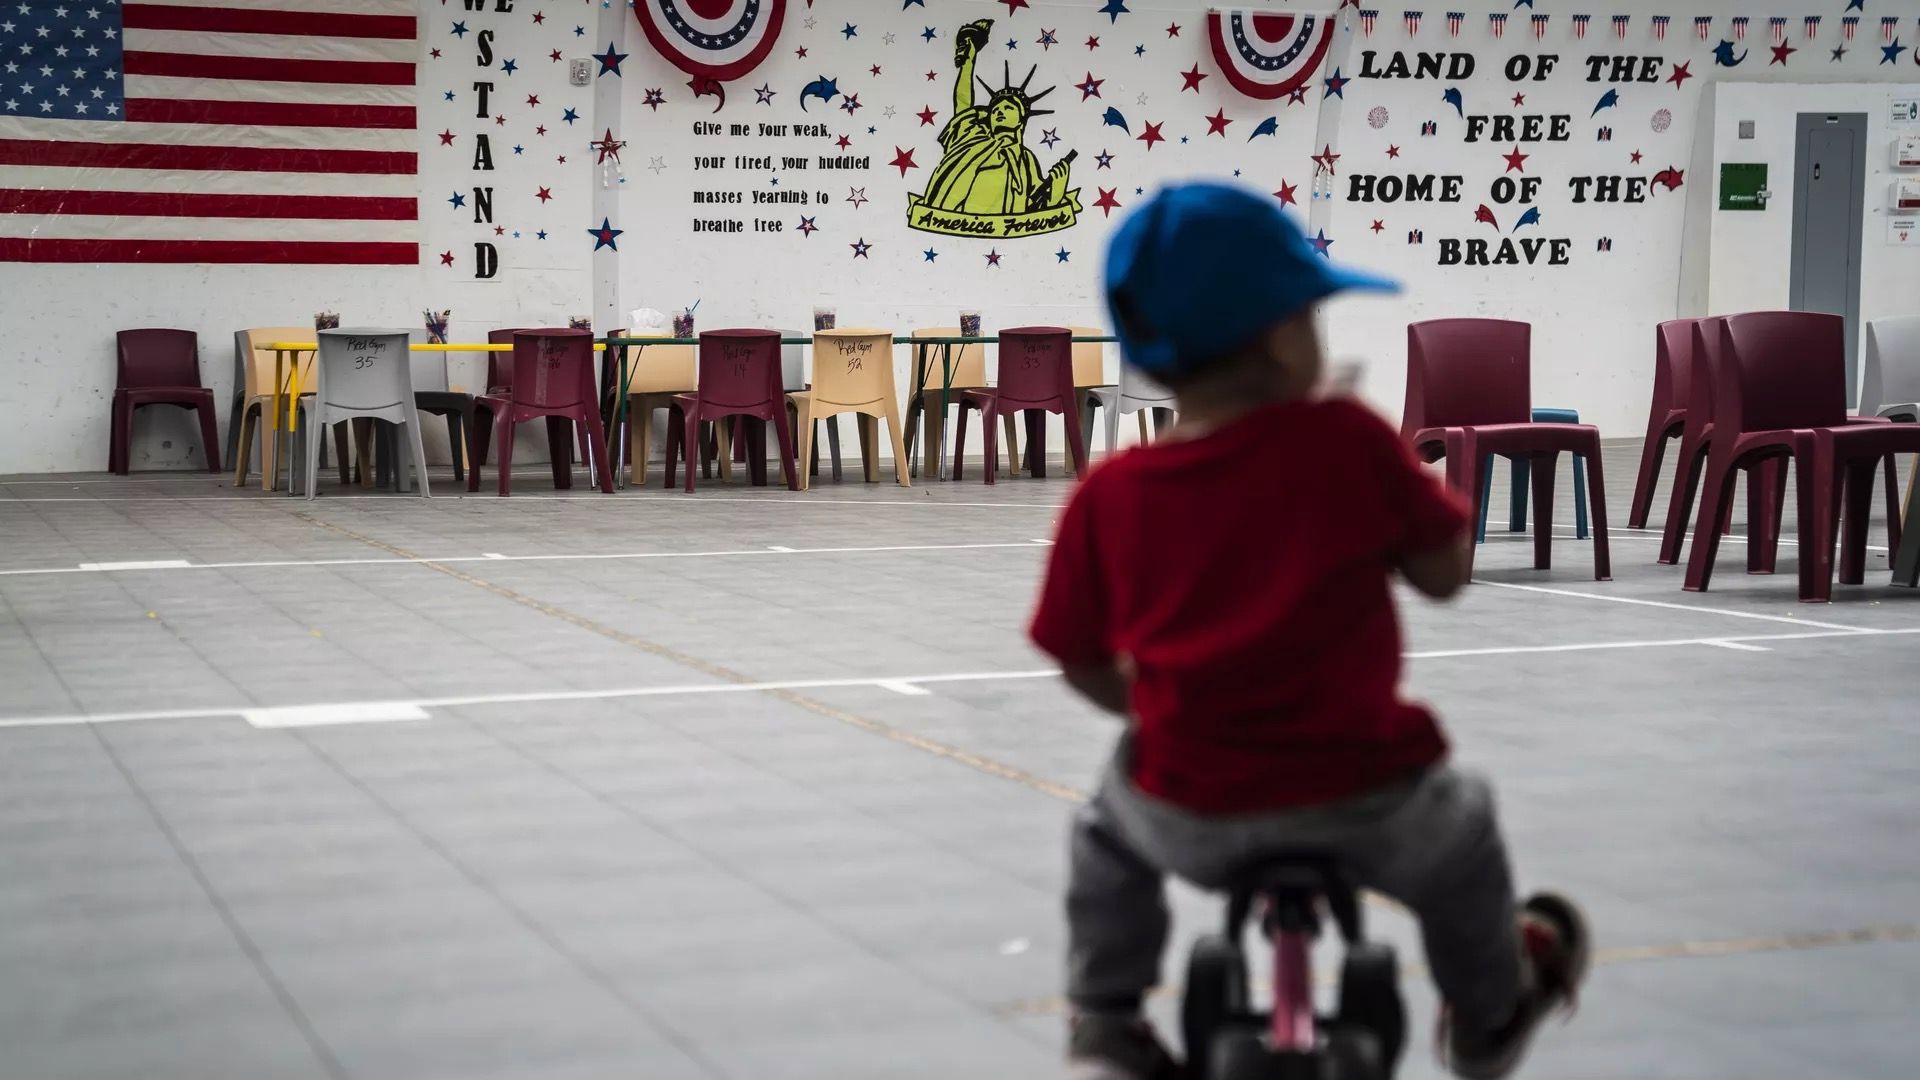 A migrant child is seen riding a tricycle in a border processing center.